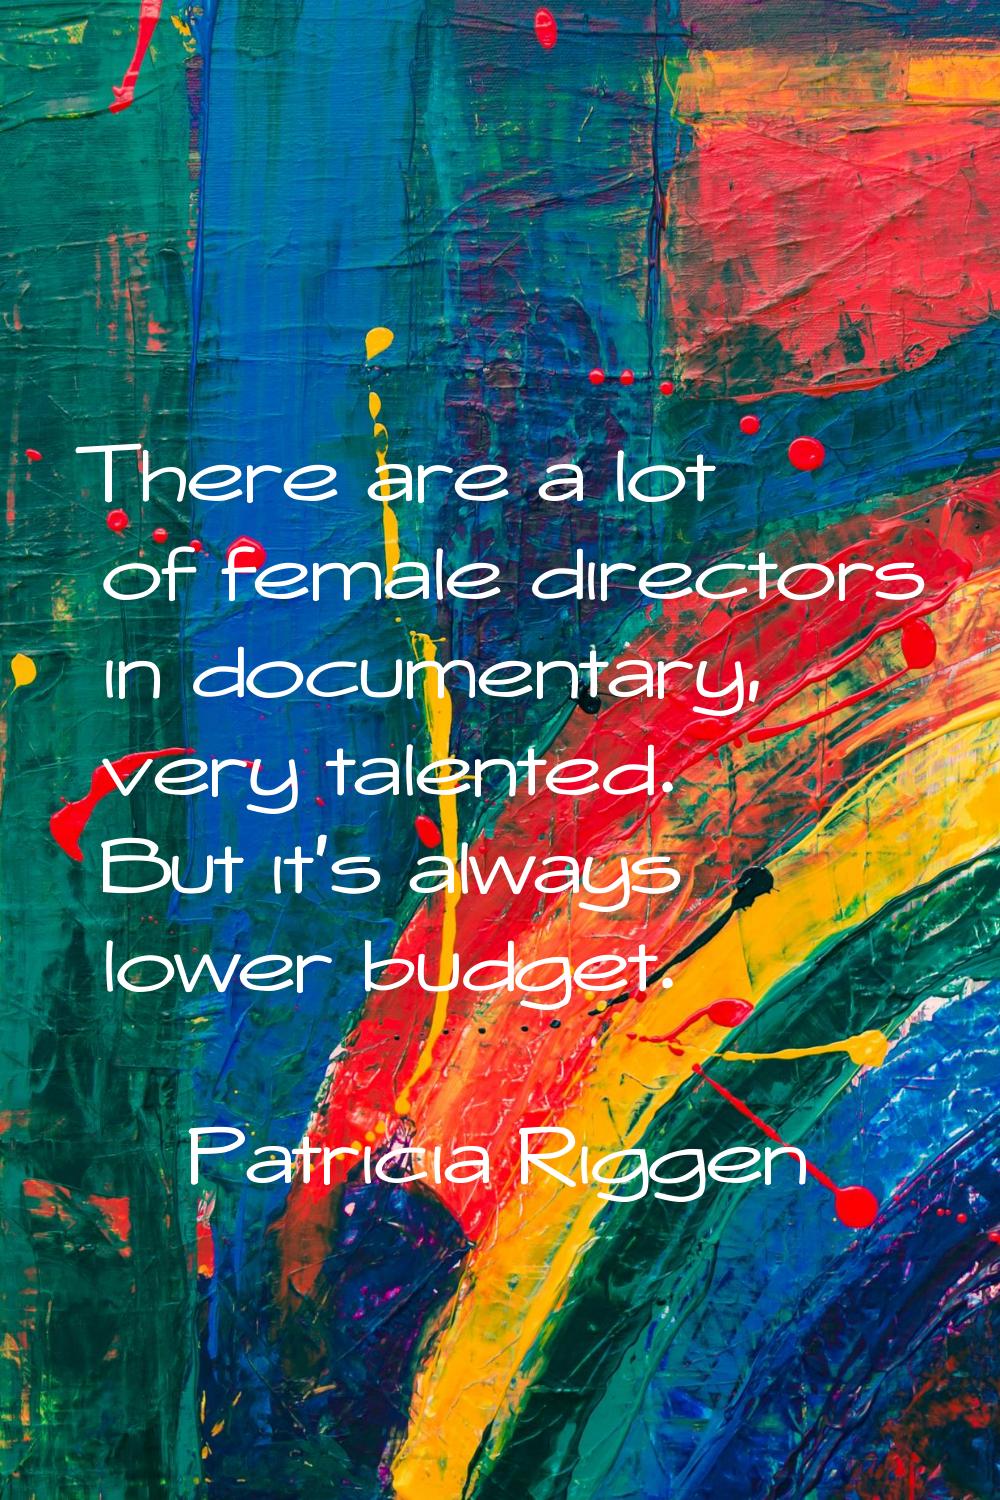 There are a lot of female directors in documentary, very talented. But it's always lower budget.